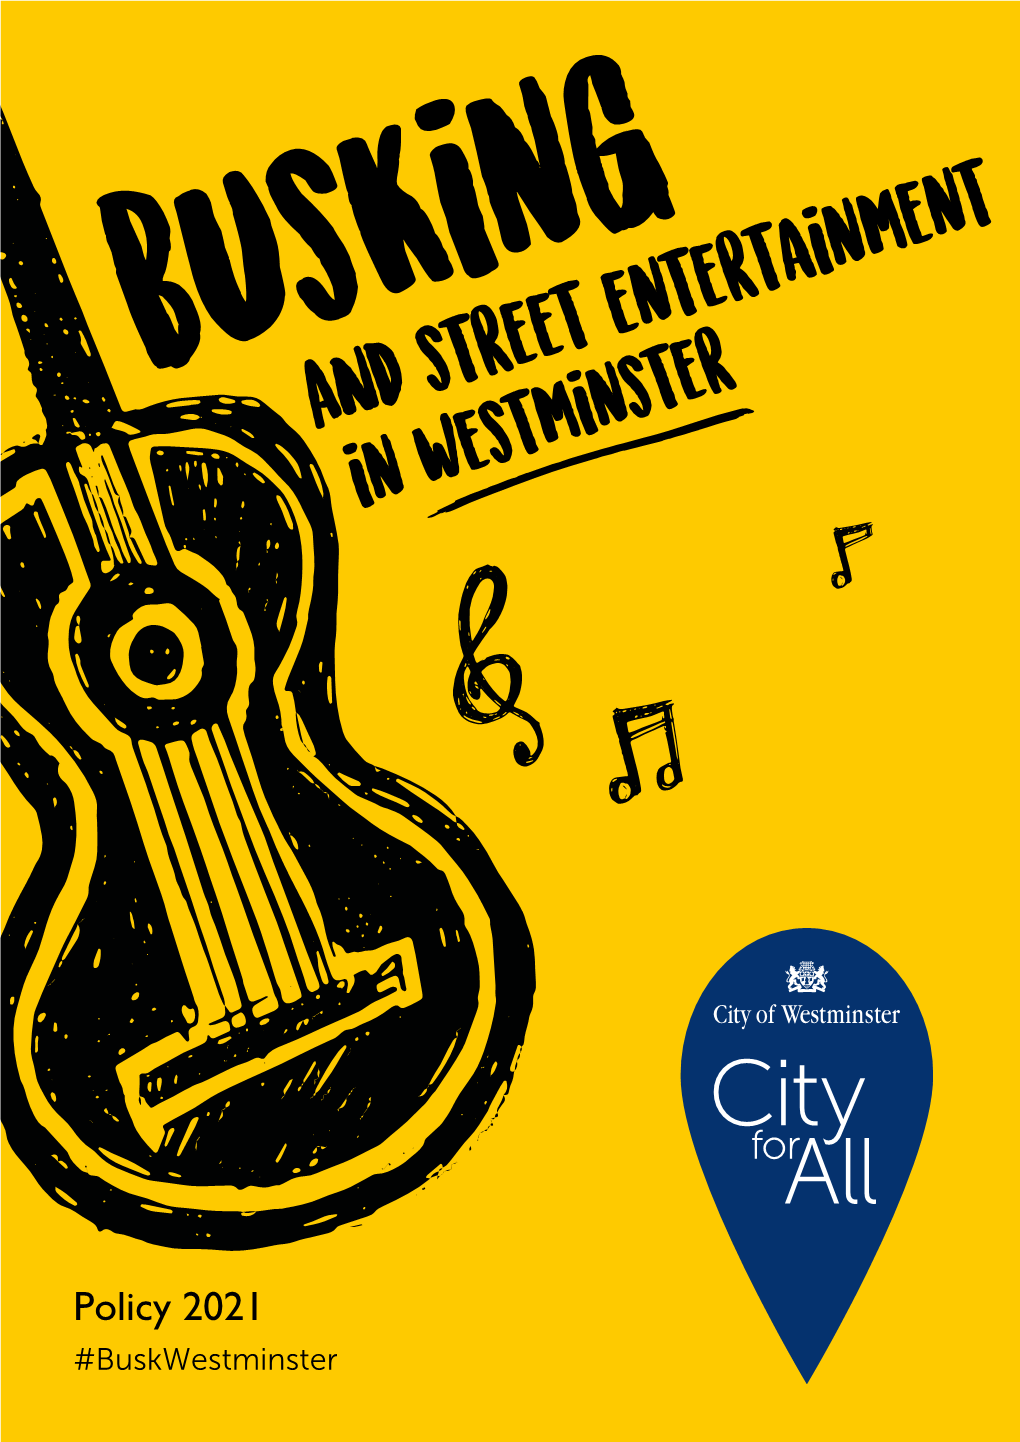 Busking and Street Entertainment Policy 2021